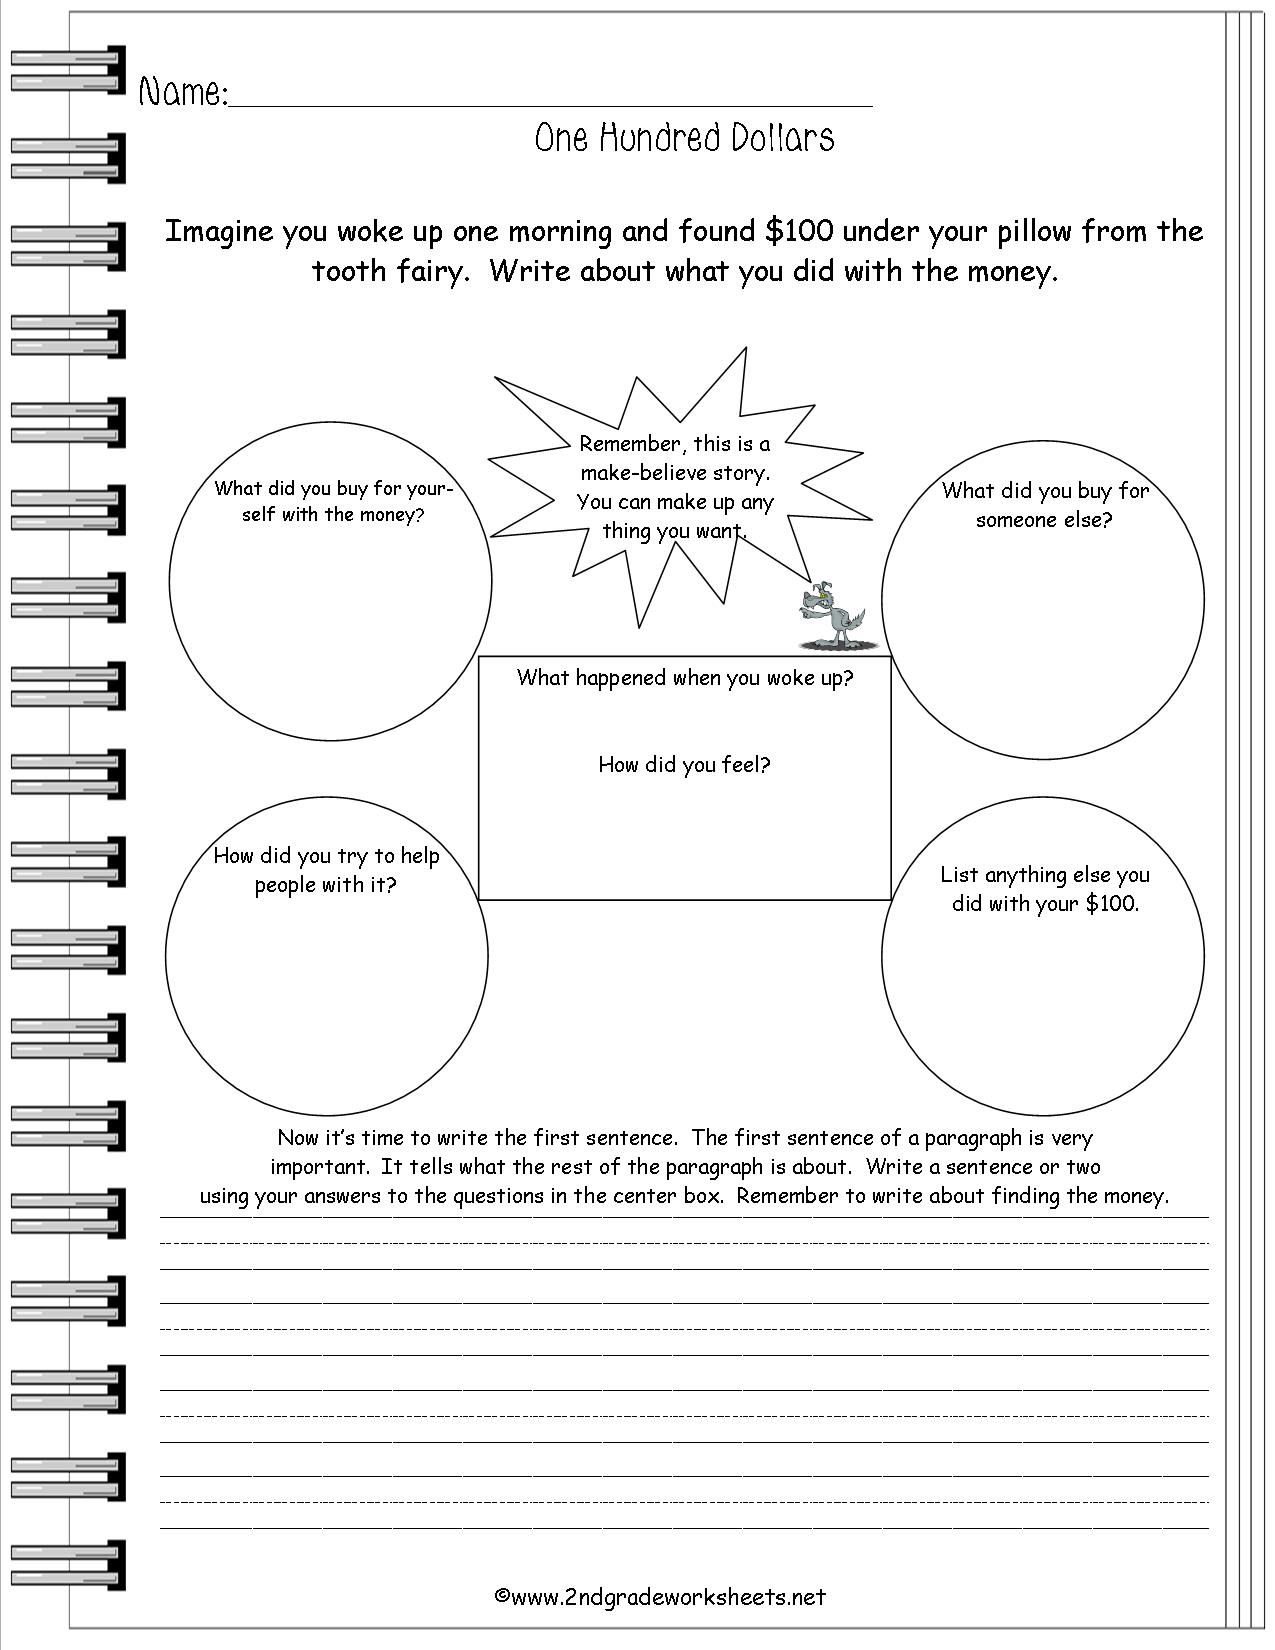 100th Day of School Writing Paper 100 Dollars